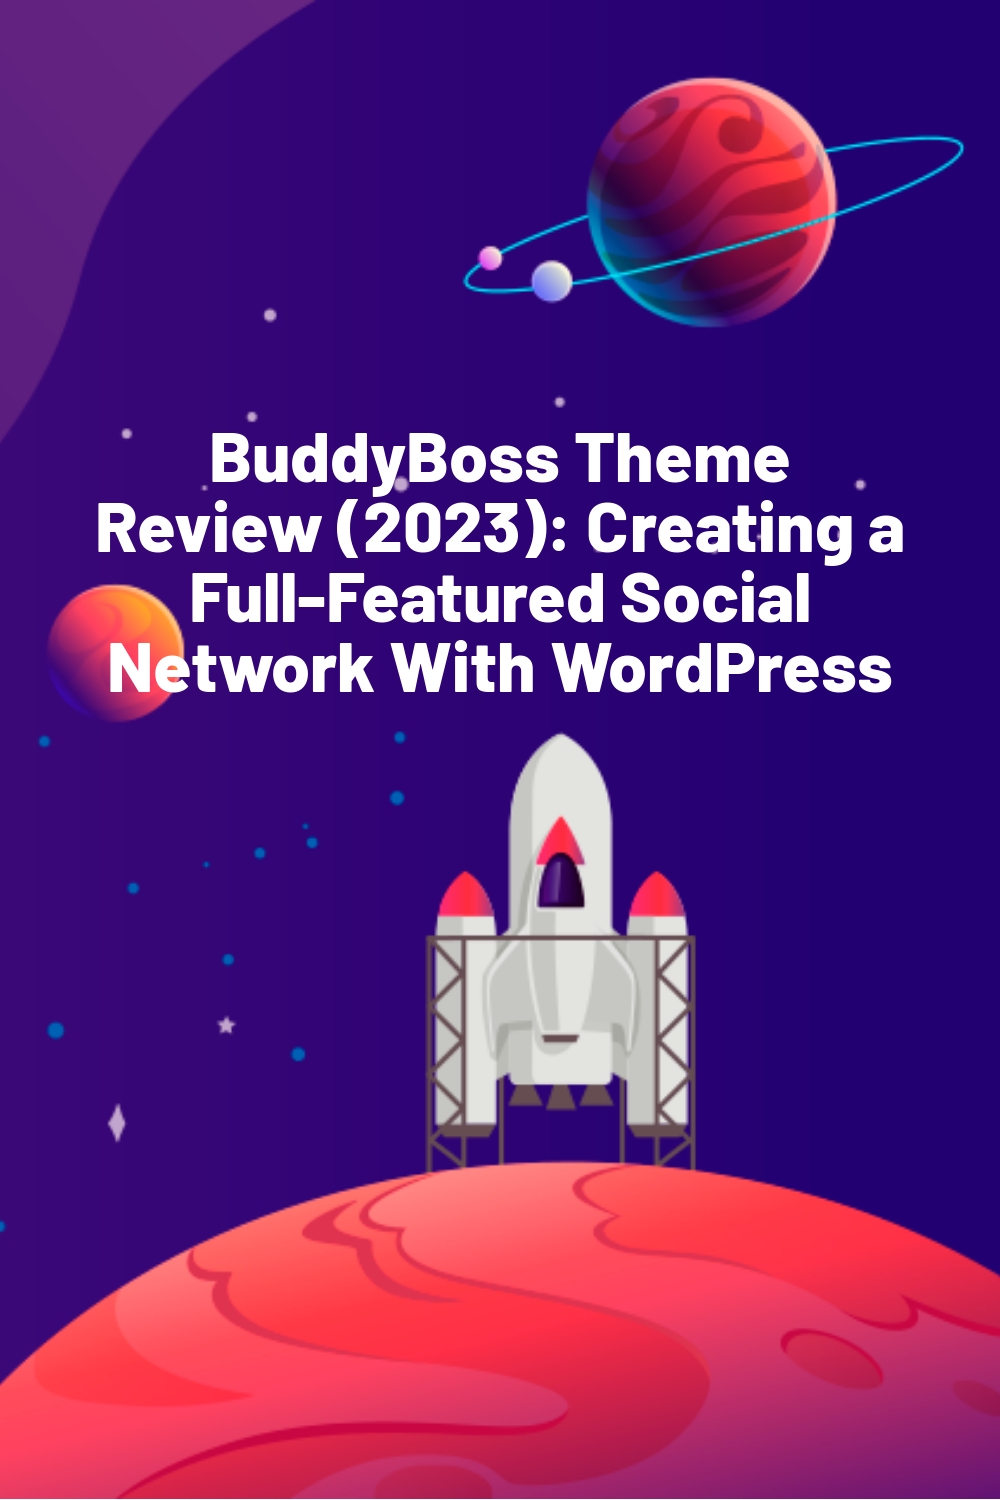 BuddyBoss Theme Review (2023): Creating a Full-Featured Social Network With WordPress